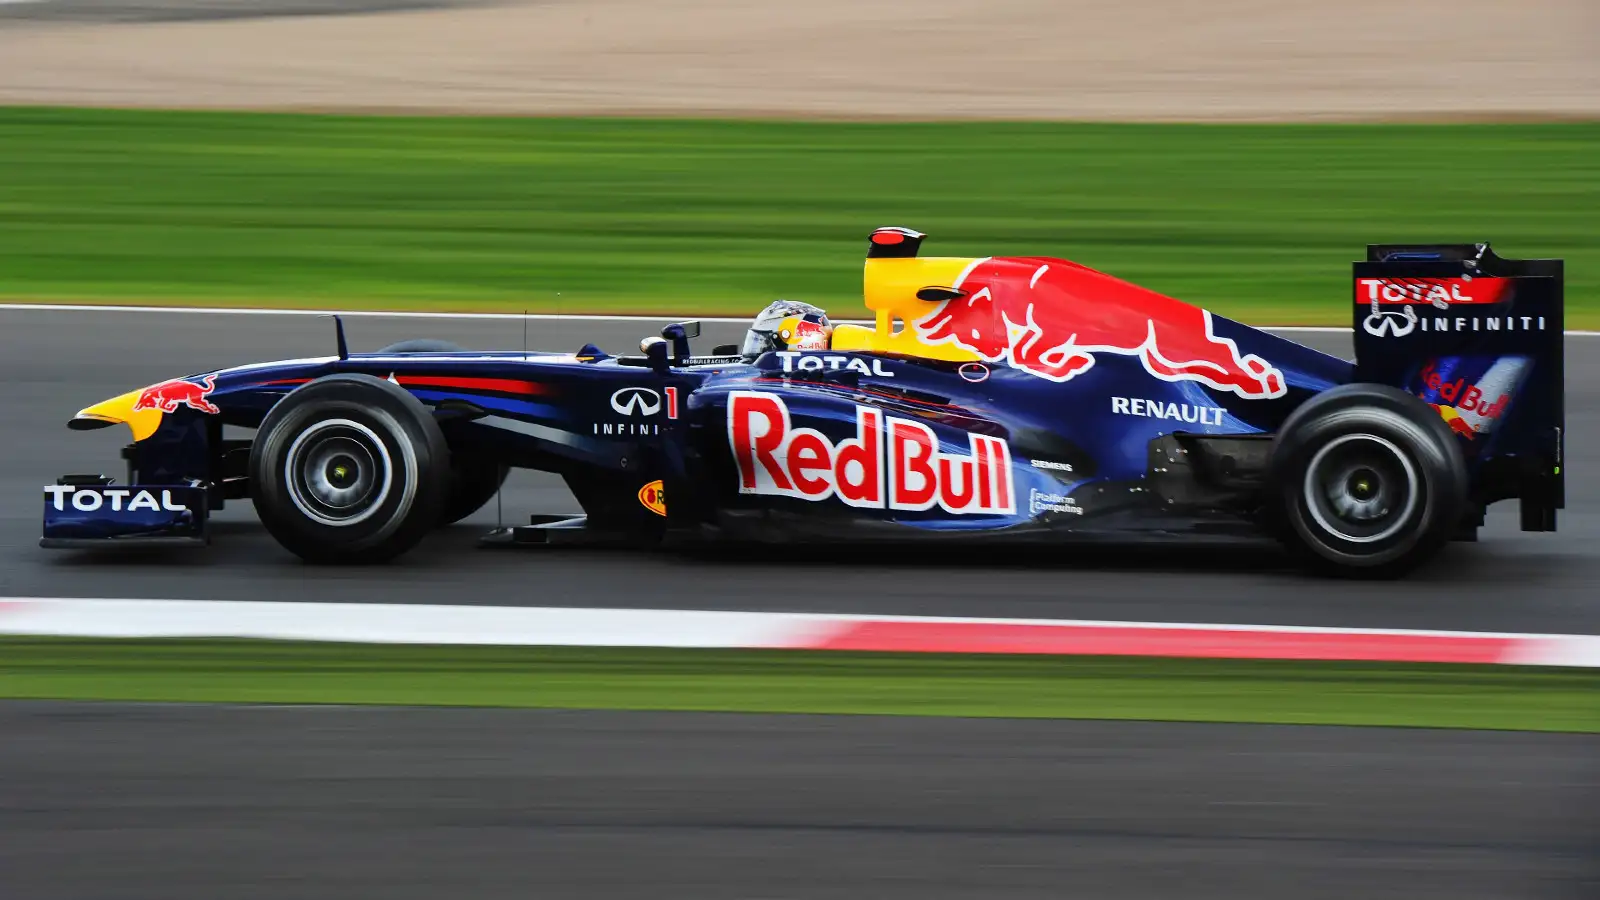 Red Bull's Sebastian Vettel on track racing at the 2011 British Grand Prix. Silverstone, July 2011. rule changes